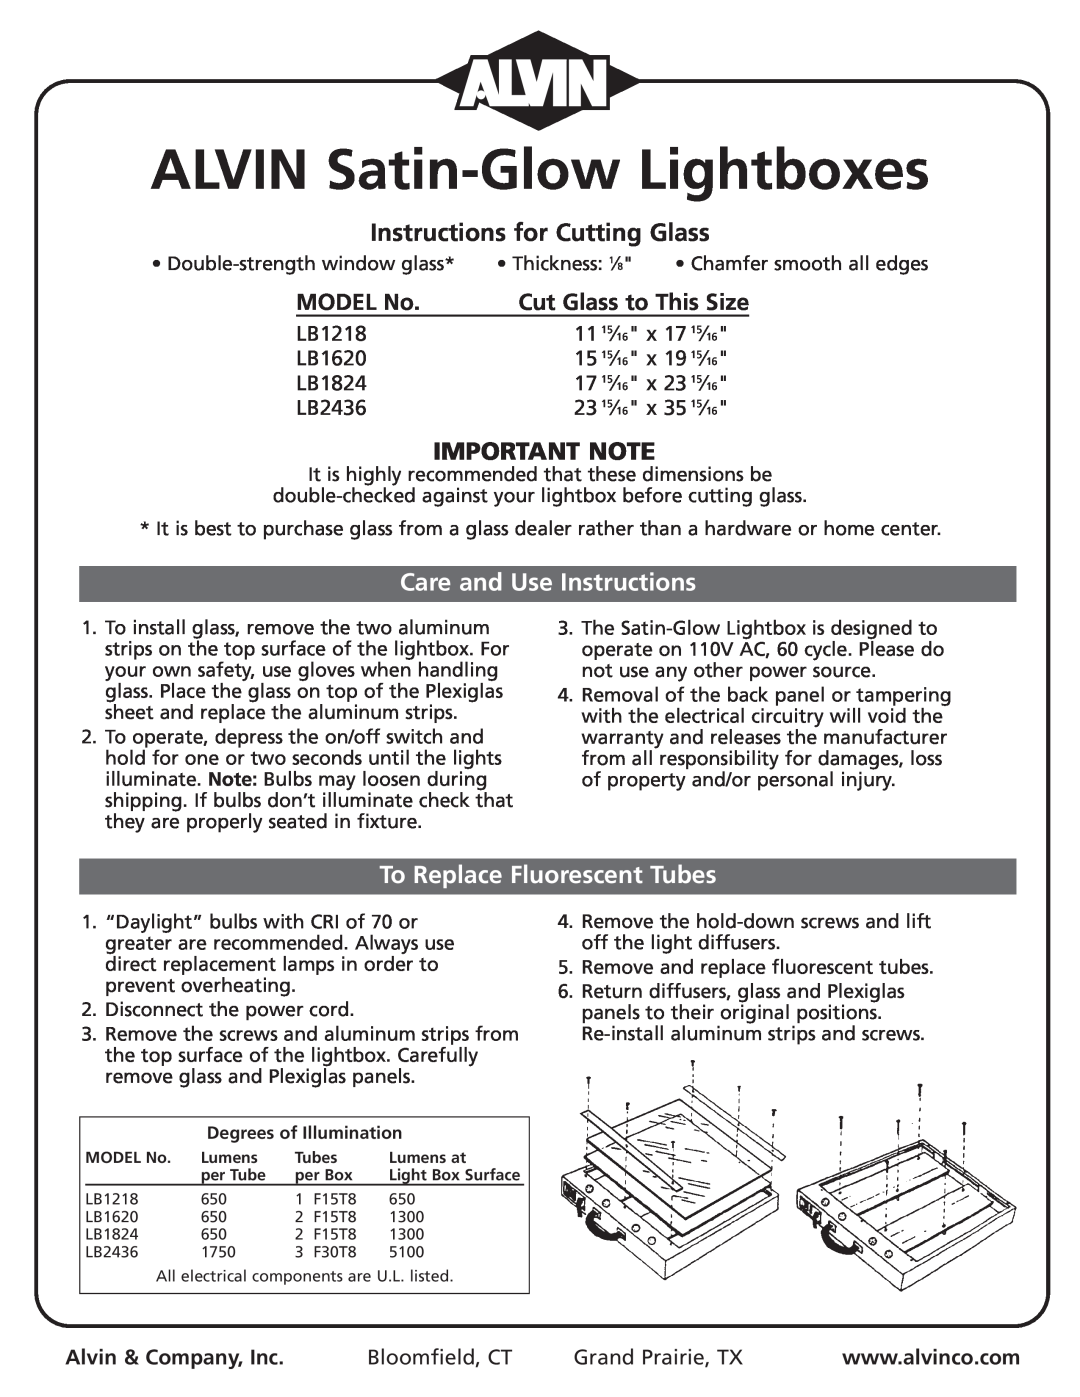 Alvin LB1620 dimensions ALVIN Satin-GlowLightboxes, Instructions for Cutting Glass, Important Note, MODEL No, LB1218 